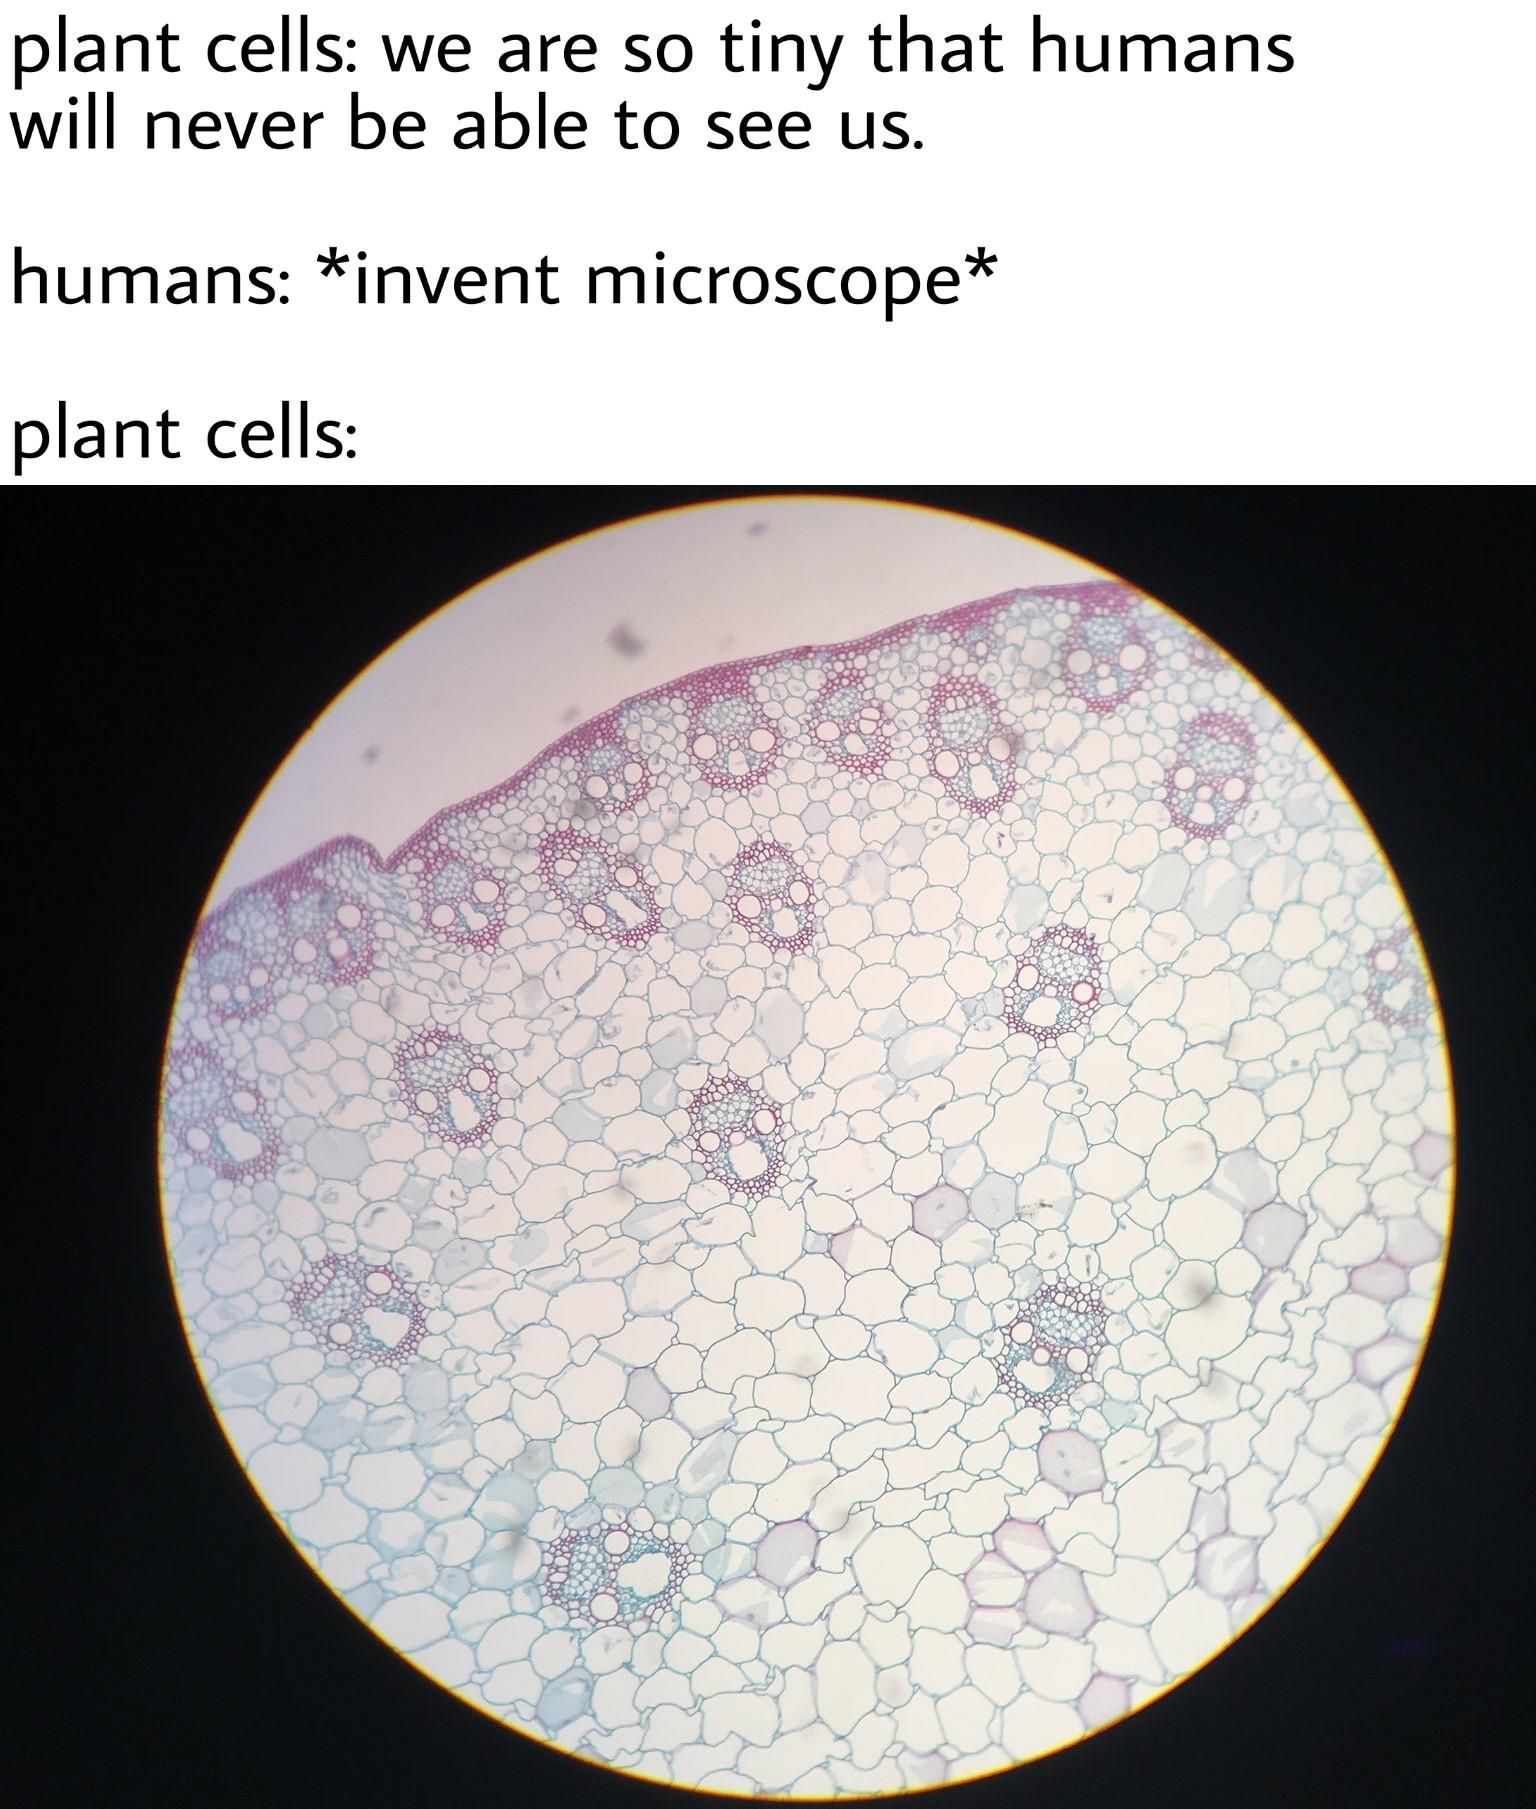 The plant cells.